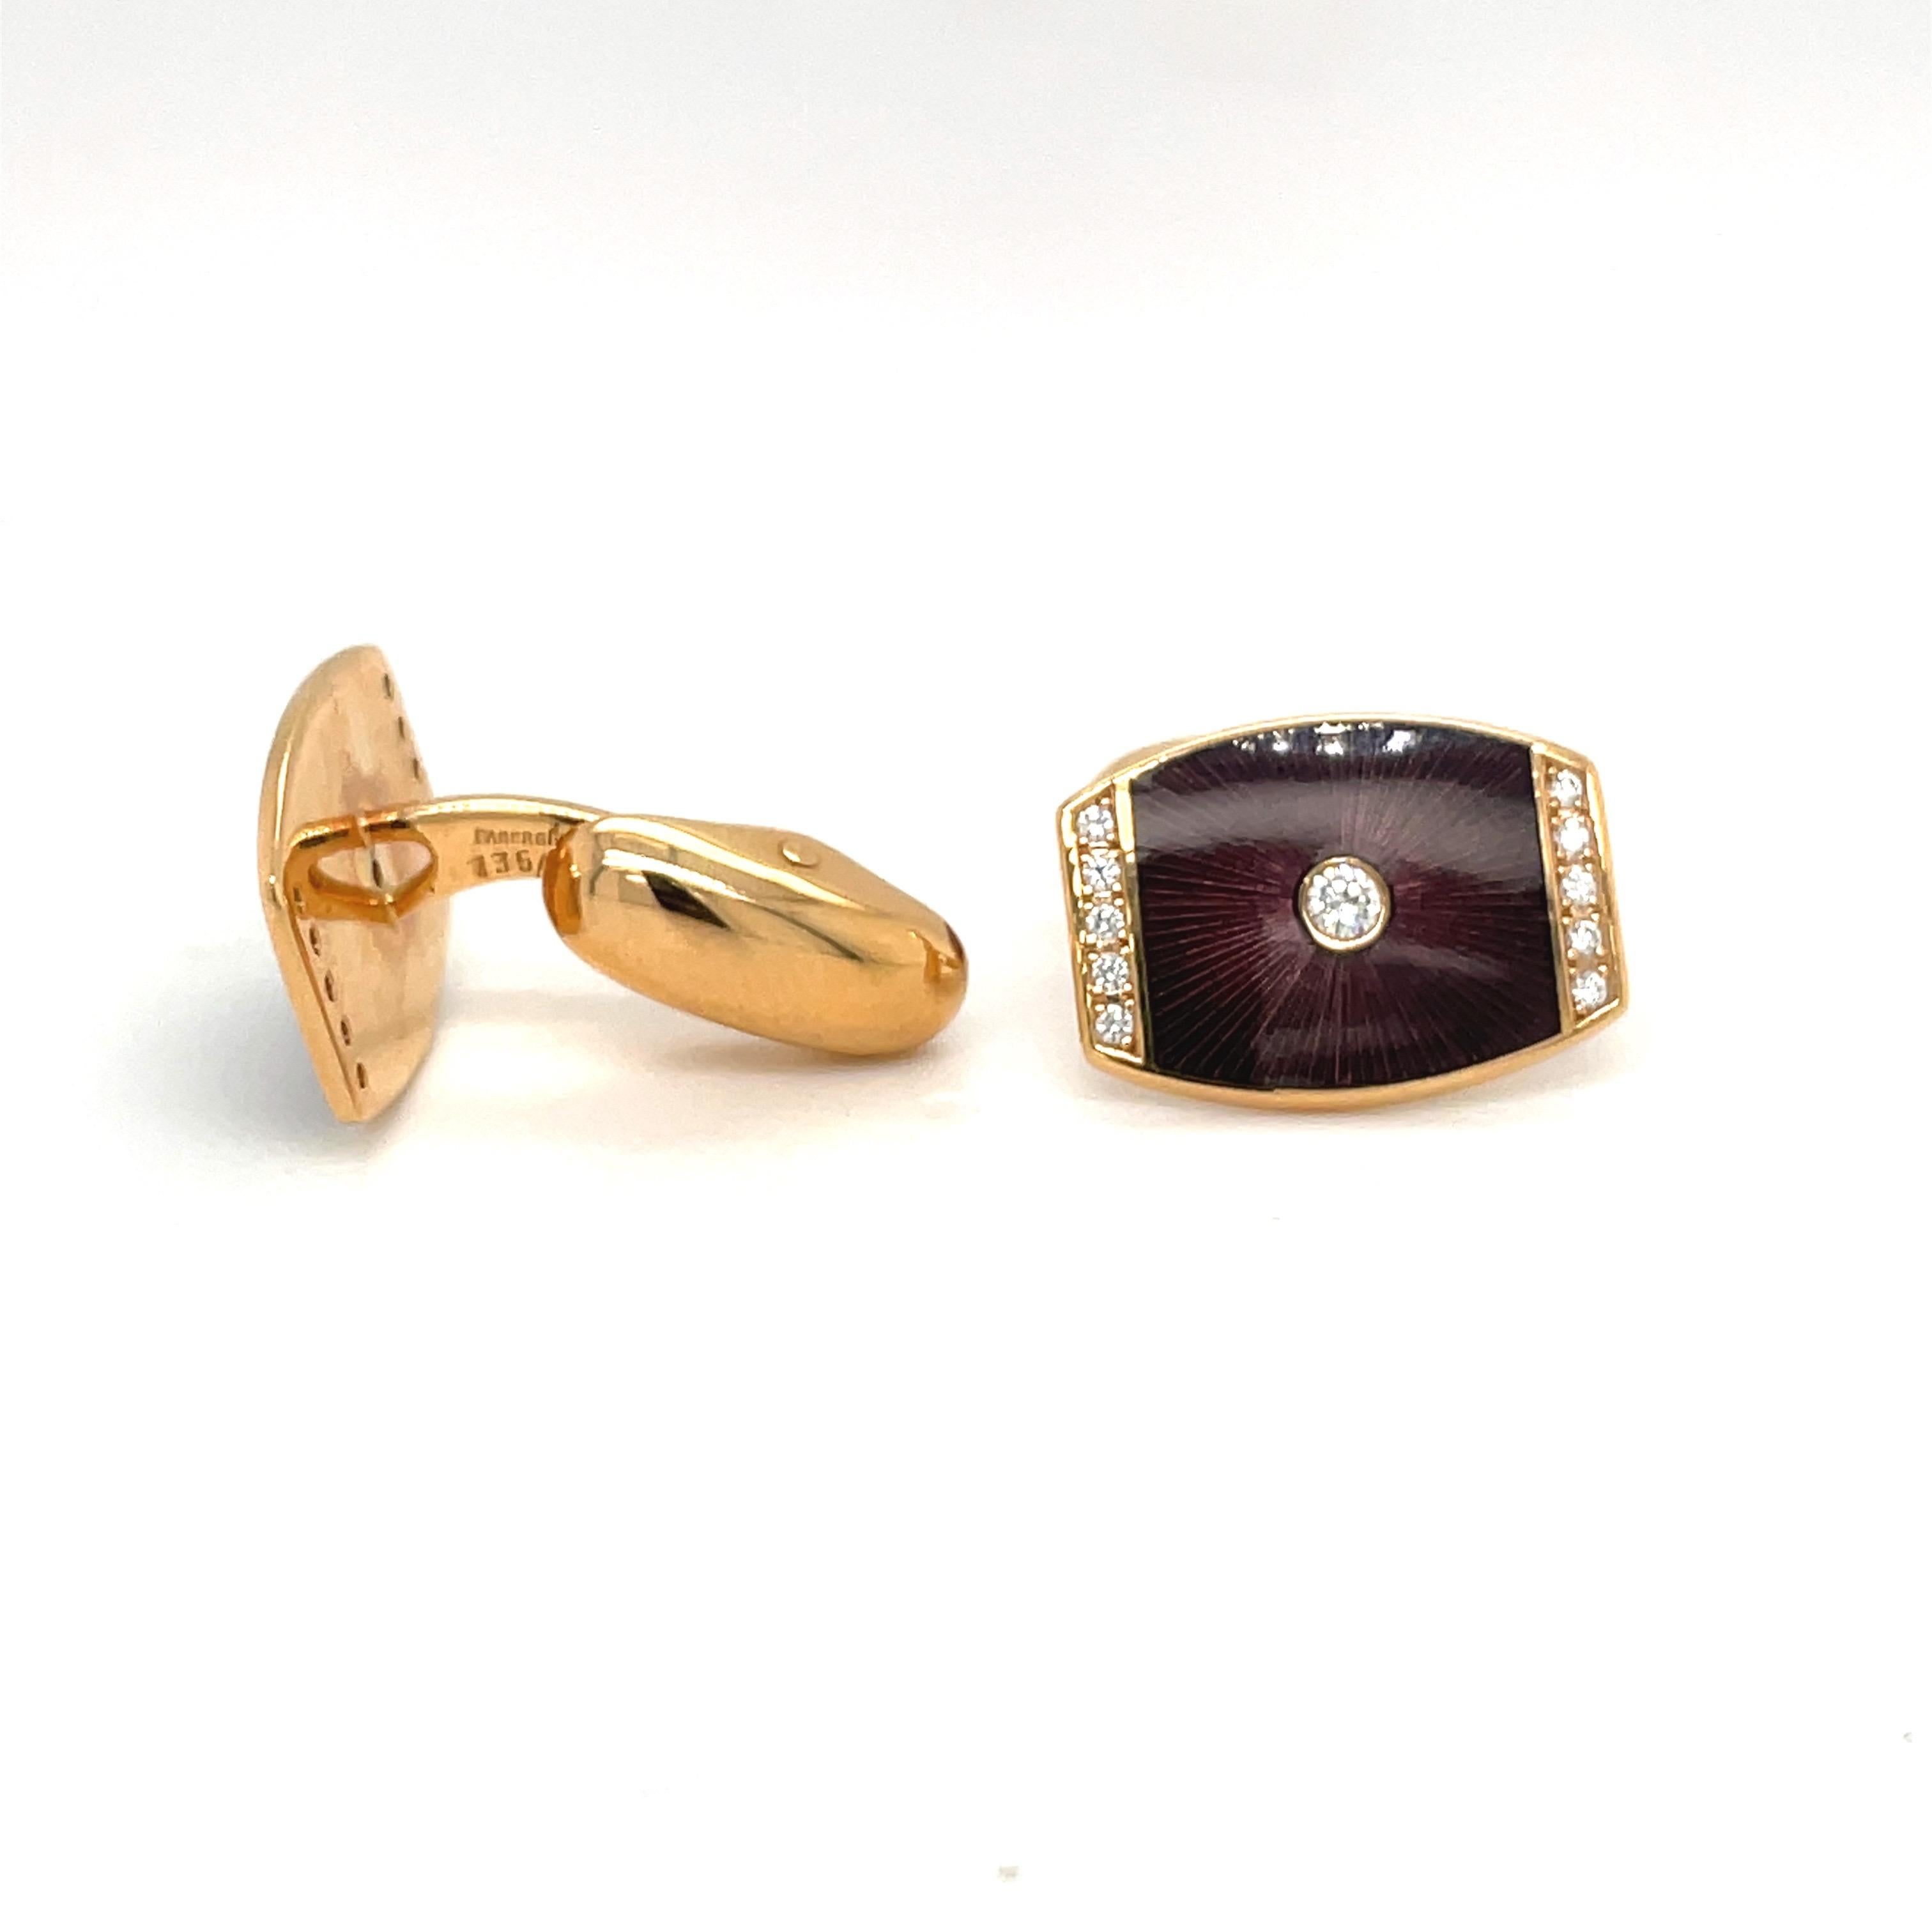 Round Cut Faberge 18kt Rose Gold Enamel and Diamond 0.32ct Cuff Links #135/1000 For Sale